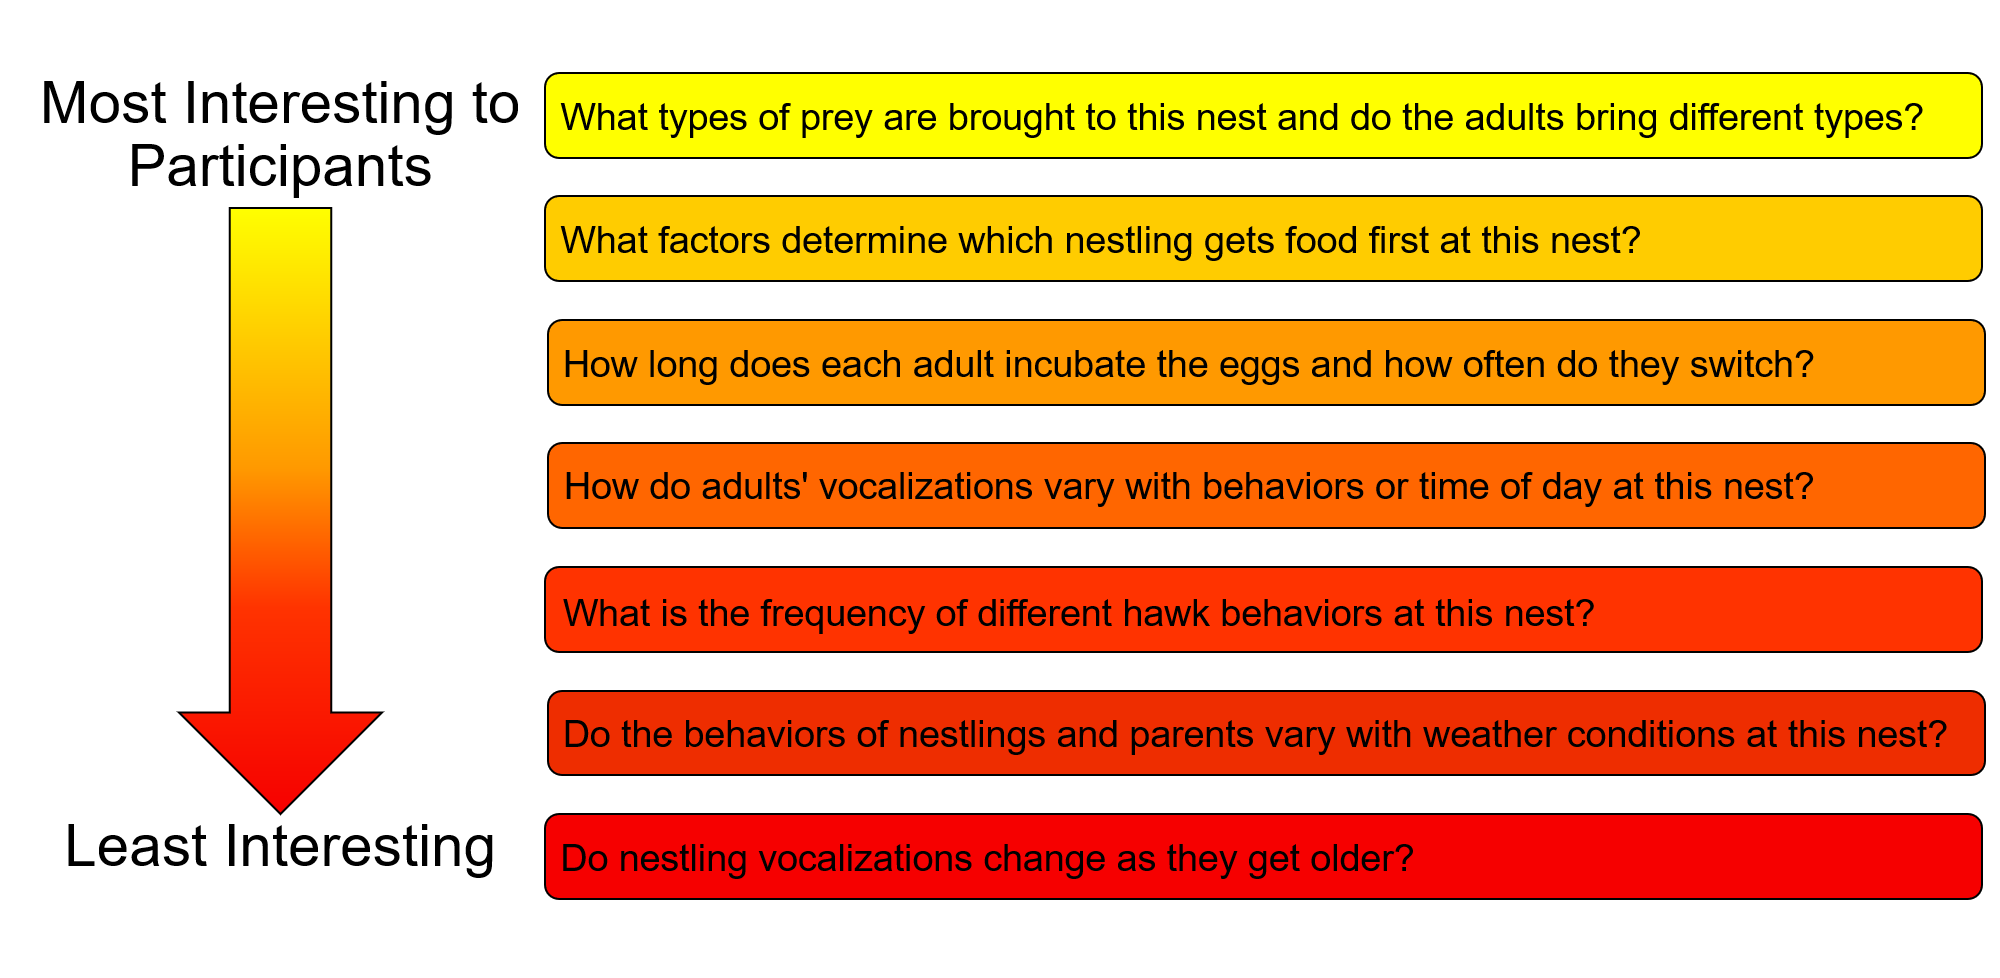 A visual ranking of the questions from those most interesting to participants in the Sorting Activity to those least interesting. The most interesting question is What types of prey are brought to the nest and do the adults bring different types?